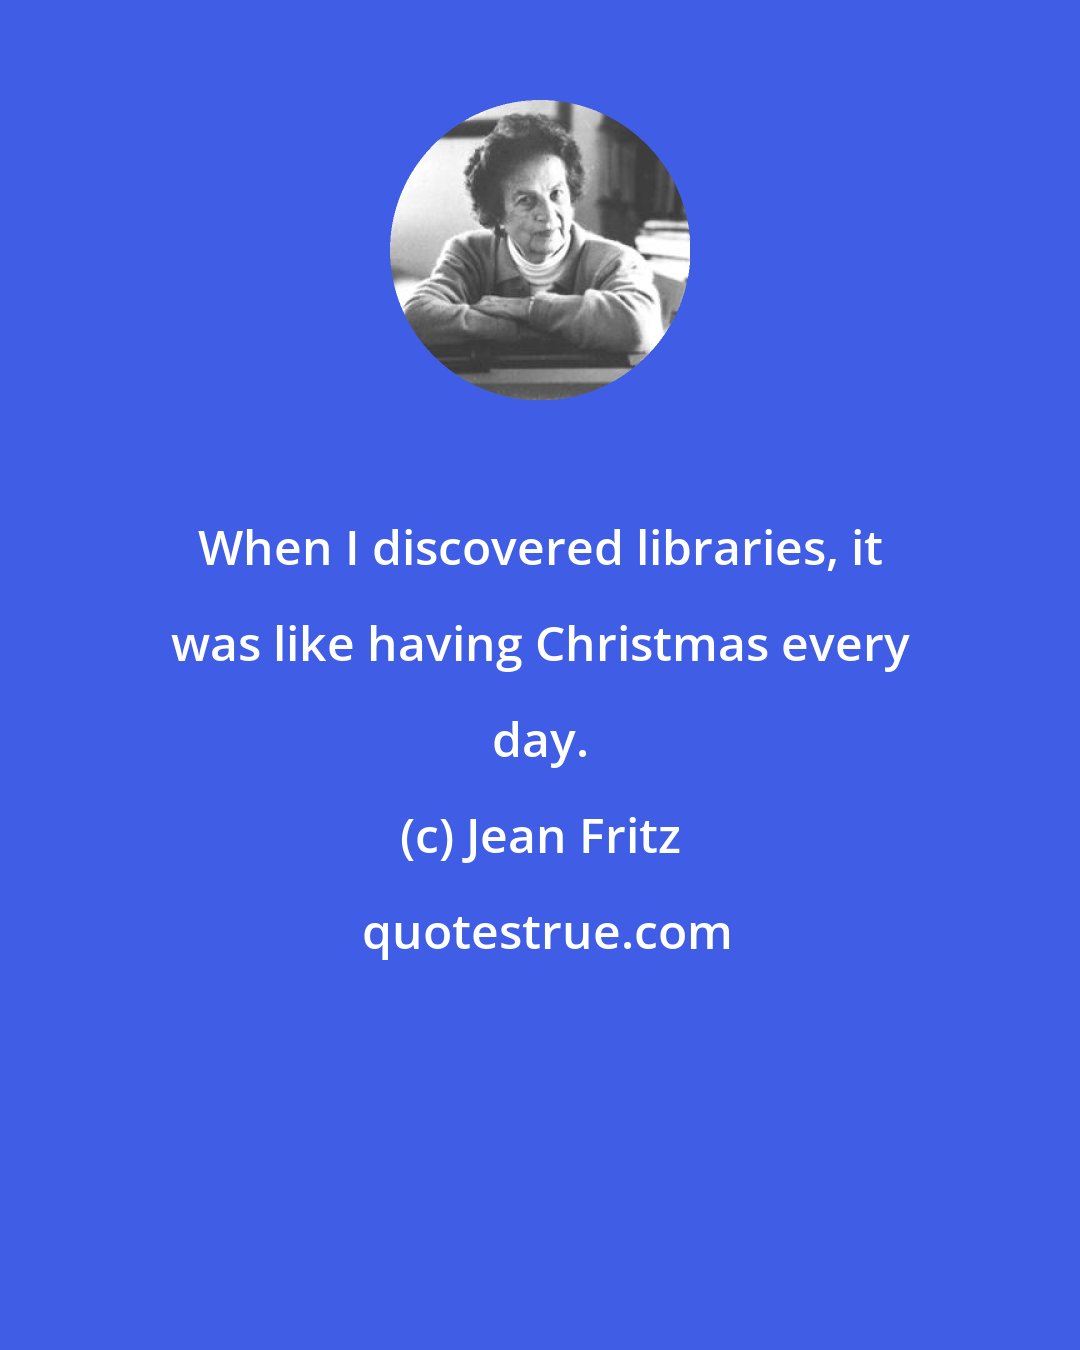 Jean Fritz: When I discovered libraries, it was like having Christmas every day.